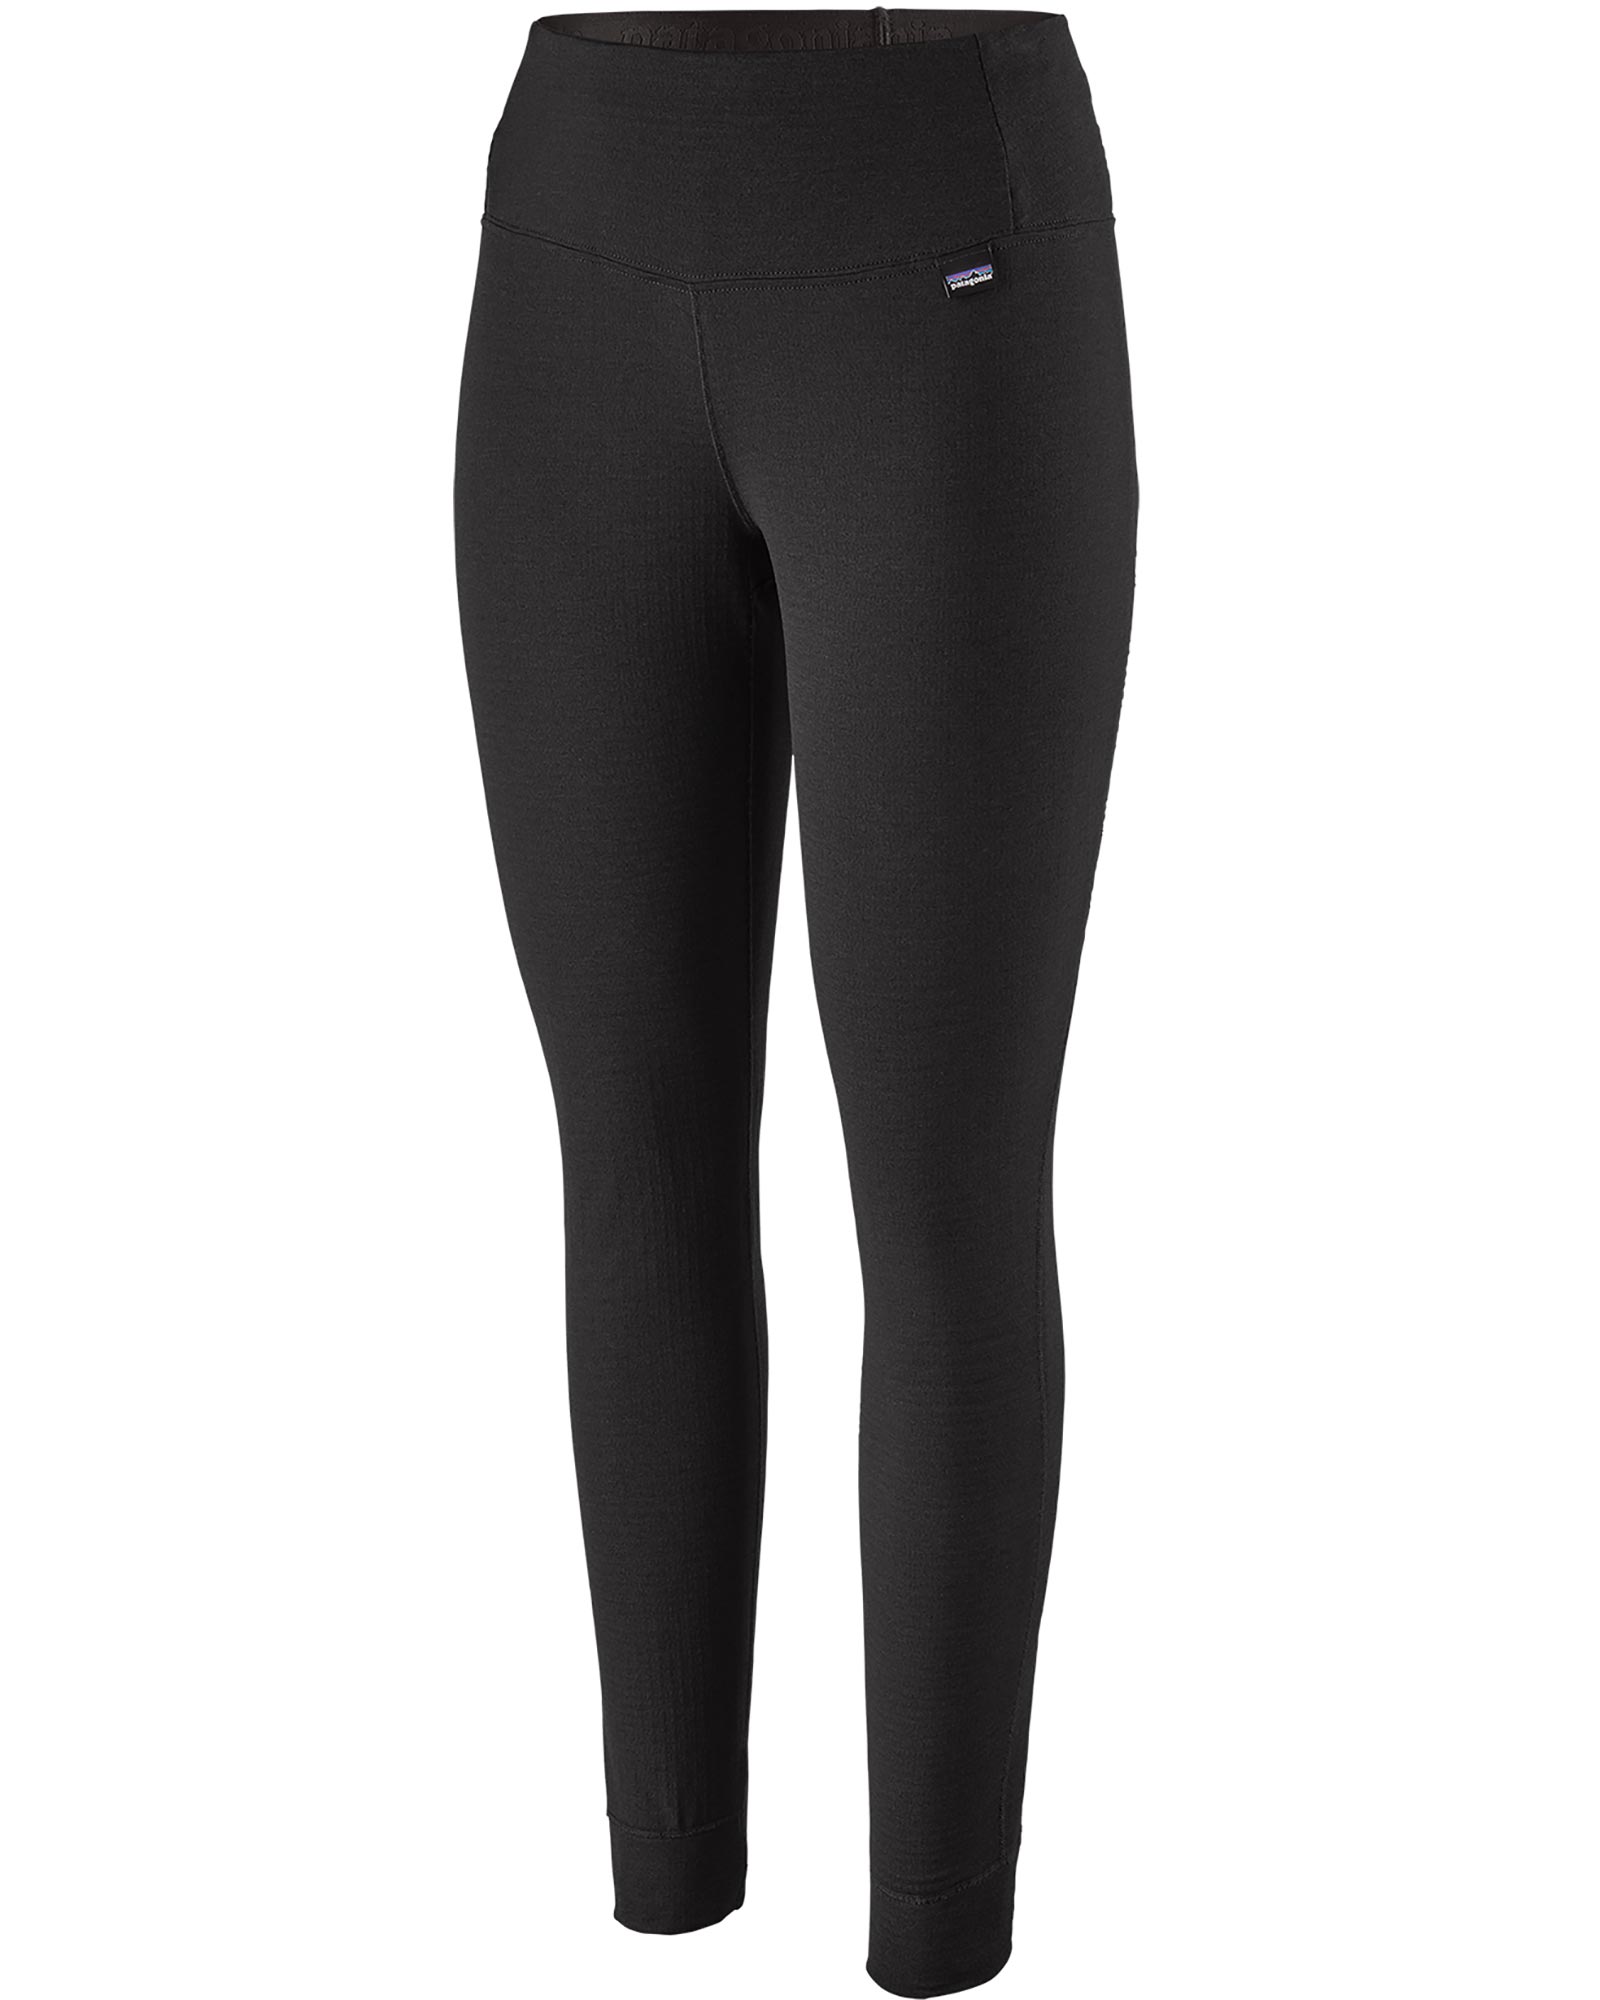 Patagonia Capilene Women’s Thermal Weight Tights - black S